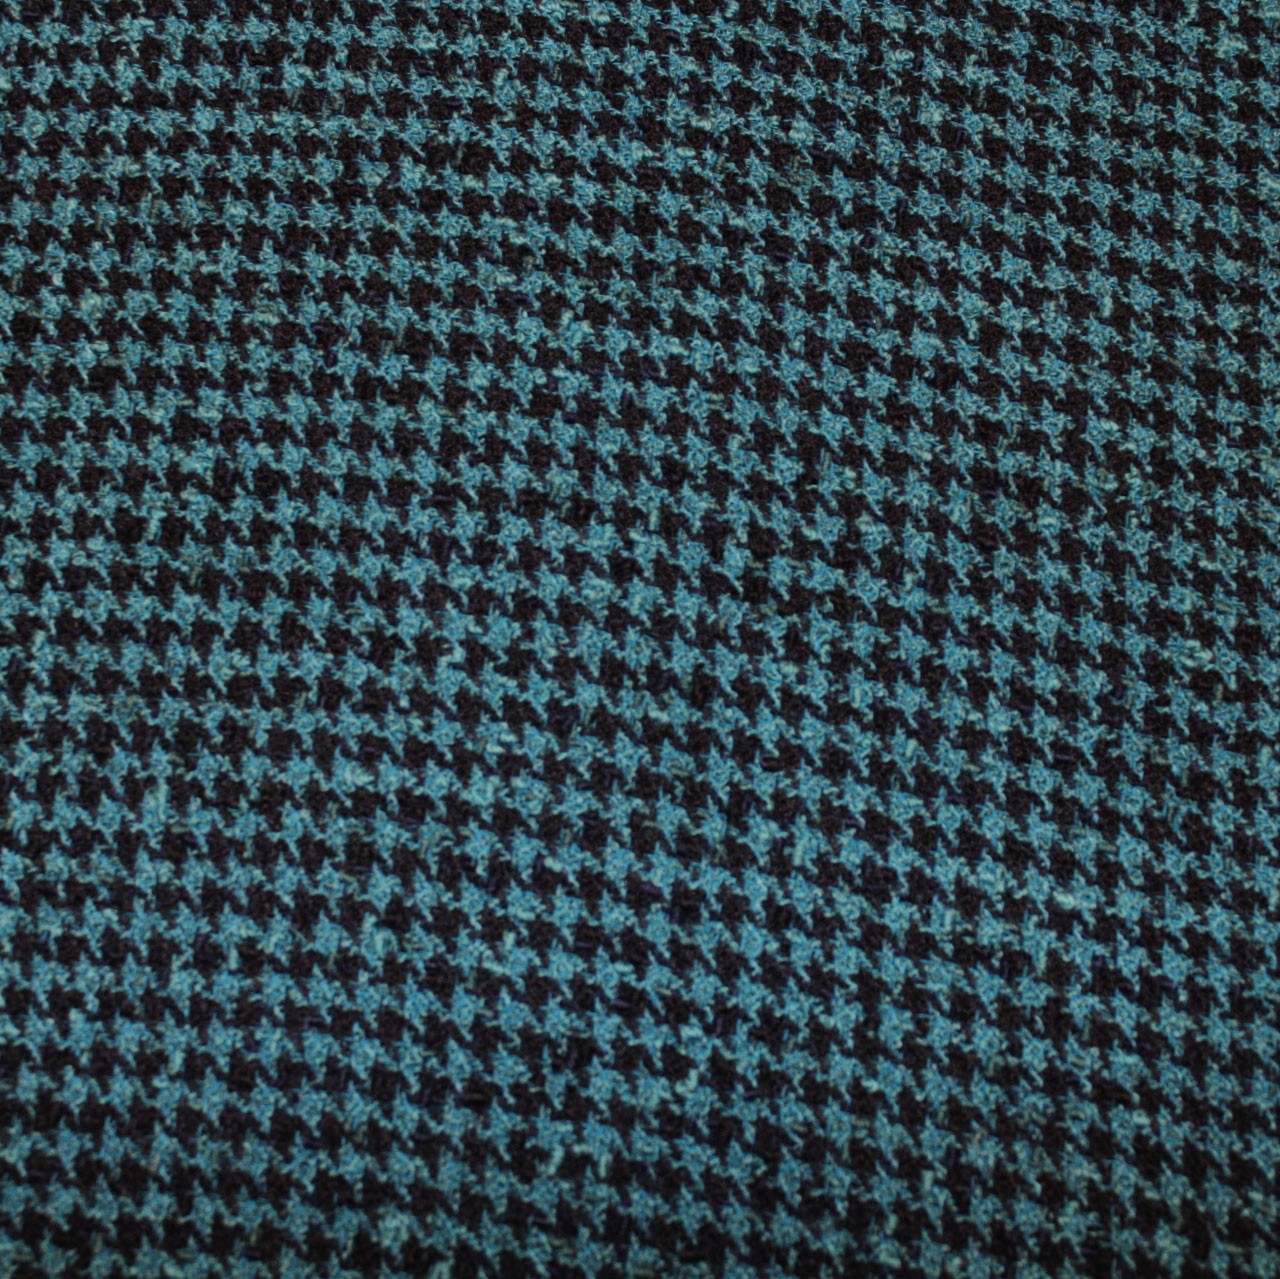 Wool Houndstooth - Navy/Turquoise  